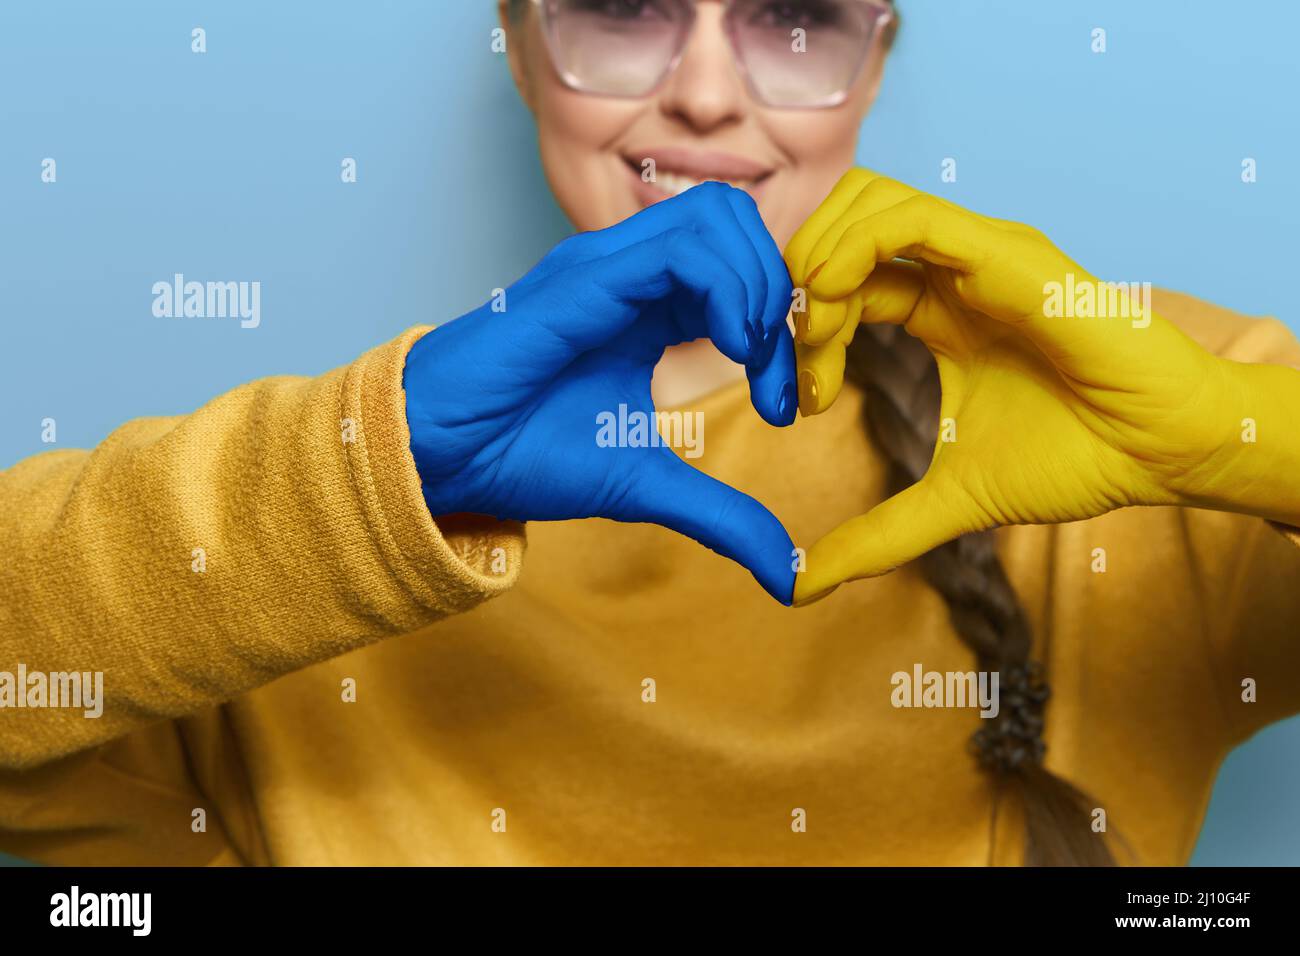 Portrait of girl showing heart shape Ukrainian yellow and blue flag on hands forming a heart. Ukraine support Stock Photo